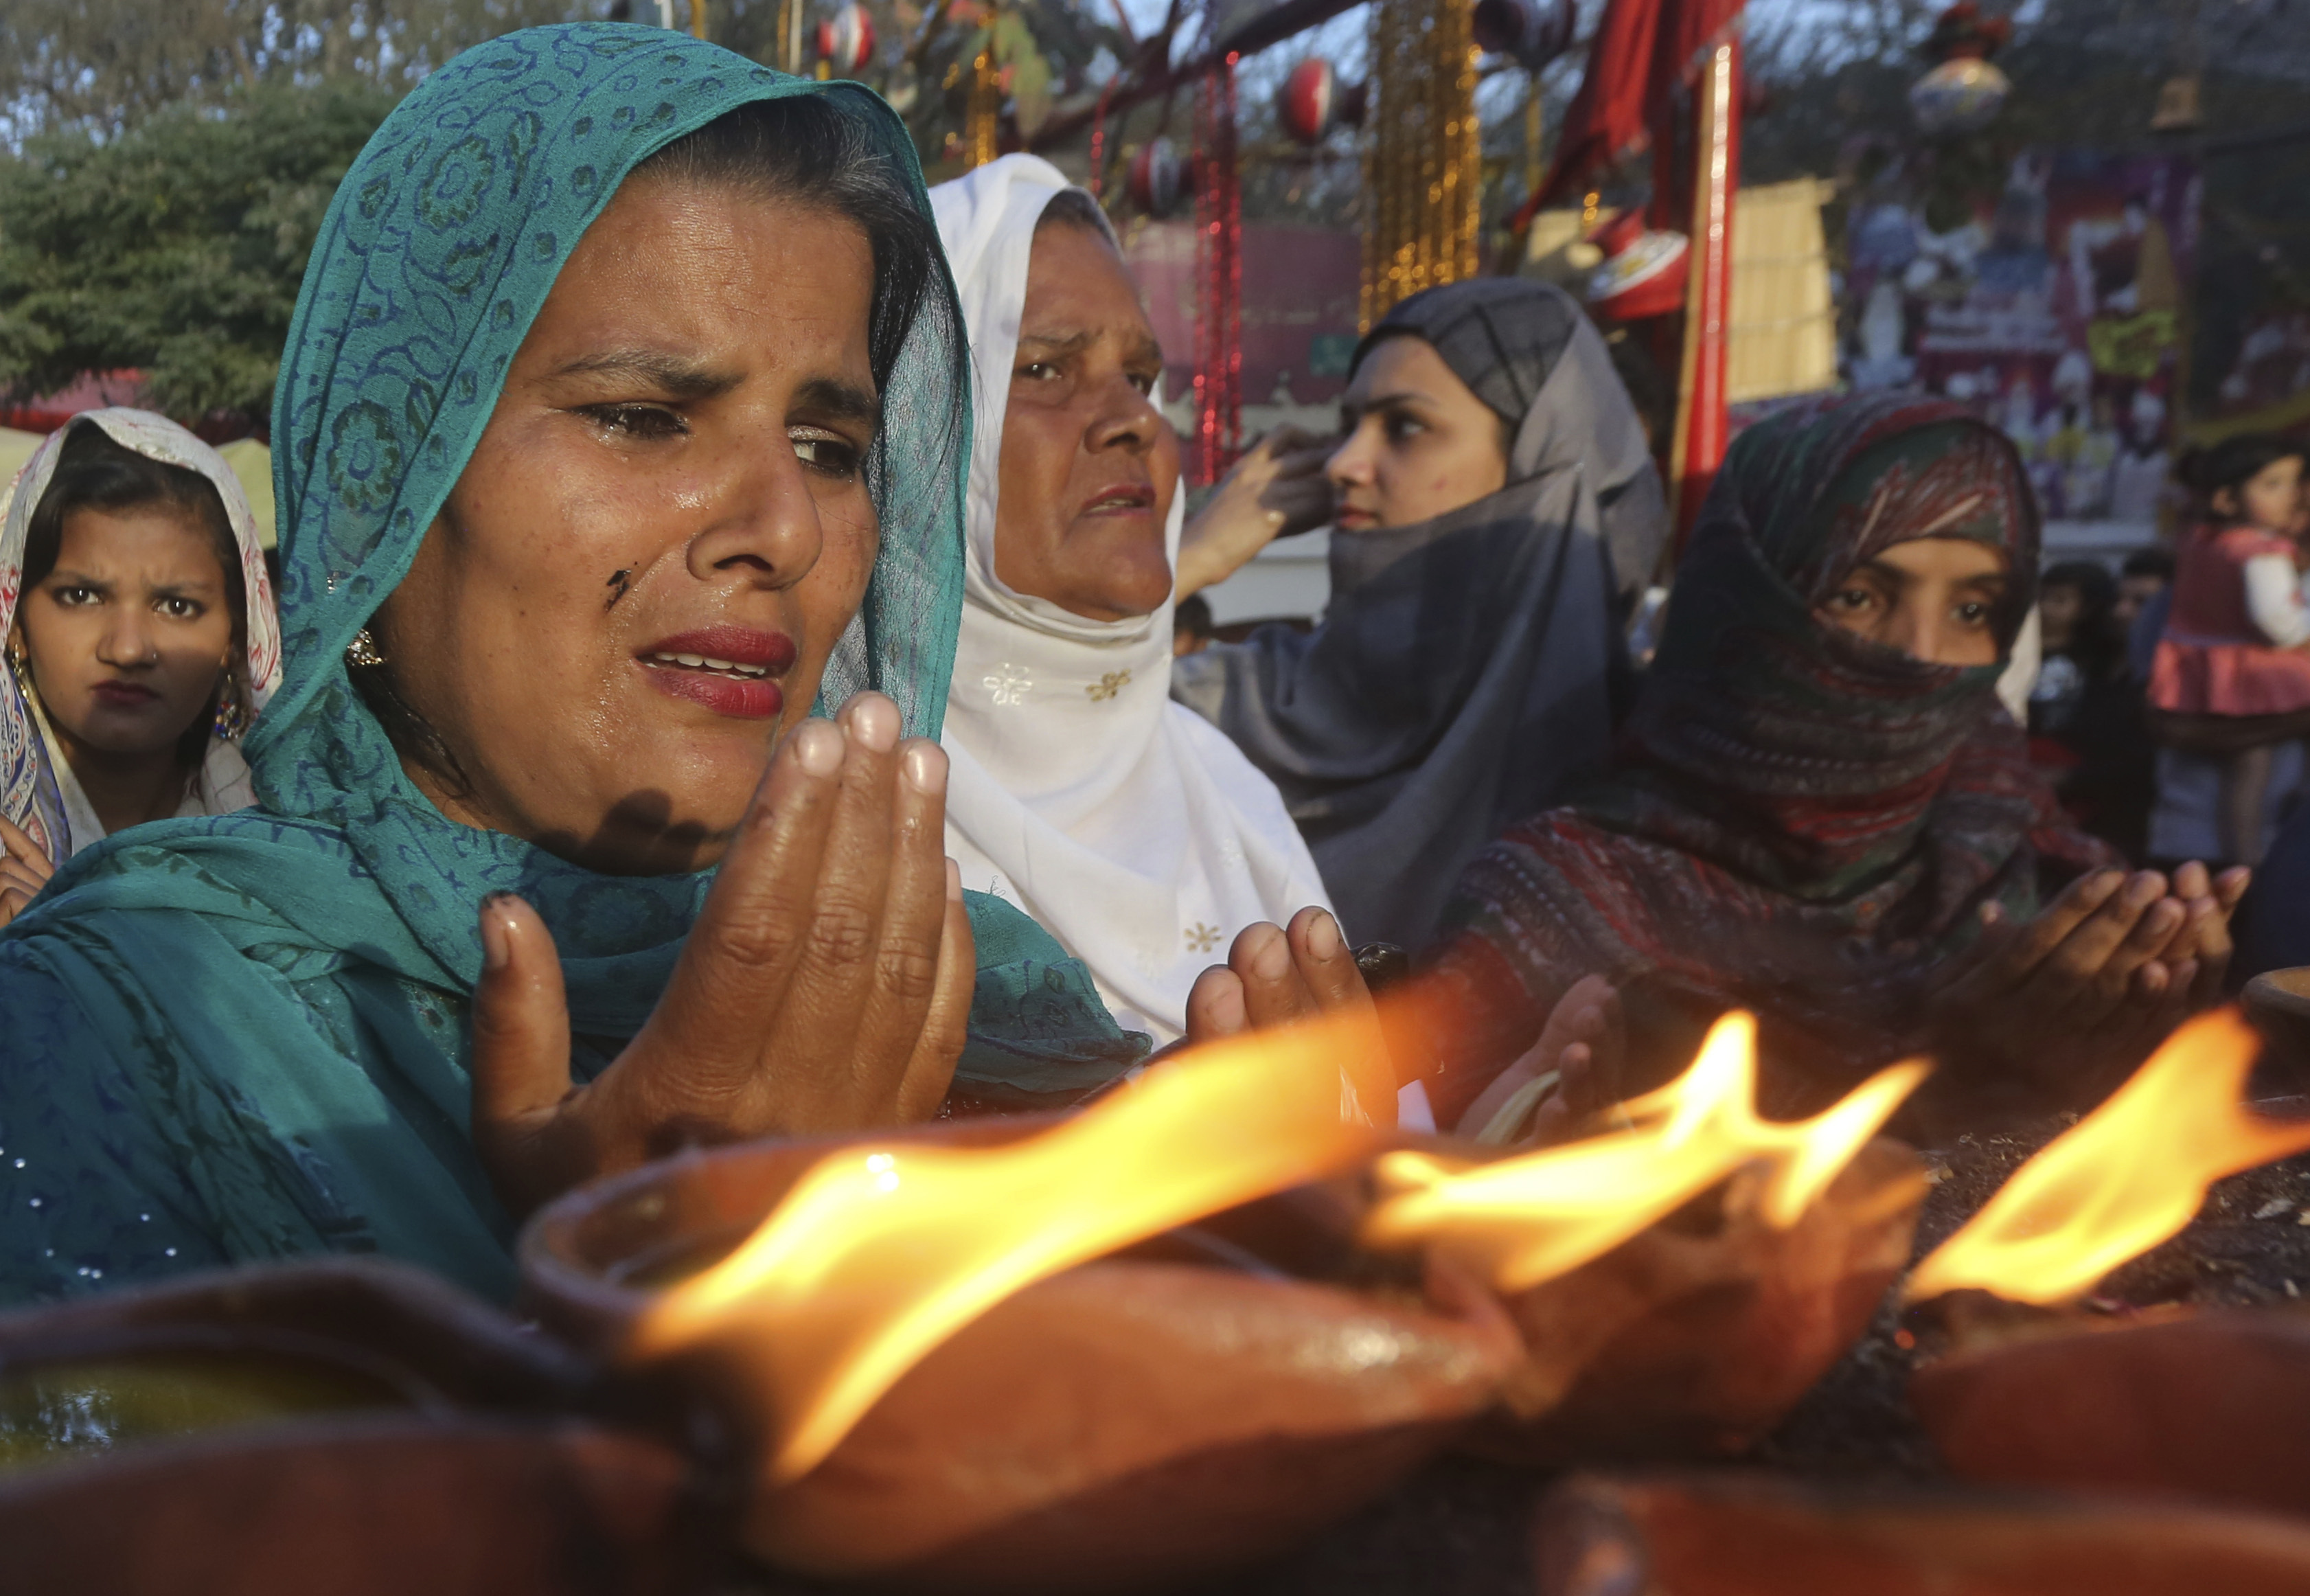 Pakistani pilgrims pray at the shrine of Madhu Lal Shah Hussain, a poet also regarded as a Sufi saint, during an annual festival to celebrate him in Lahore, Pakistan, Monday, April 1, 2019. The annual festival to commemorate Shah Hussain (1538-1599) started with thousands of people expected to visit the shrine. (AP Photo/K.M Chaudary)